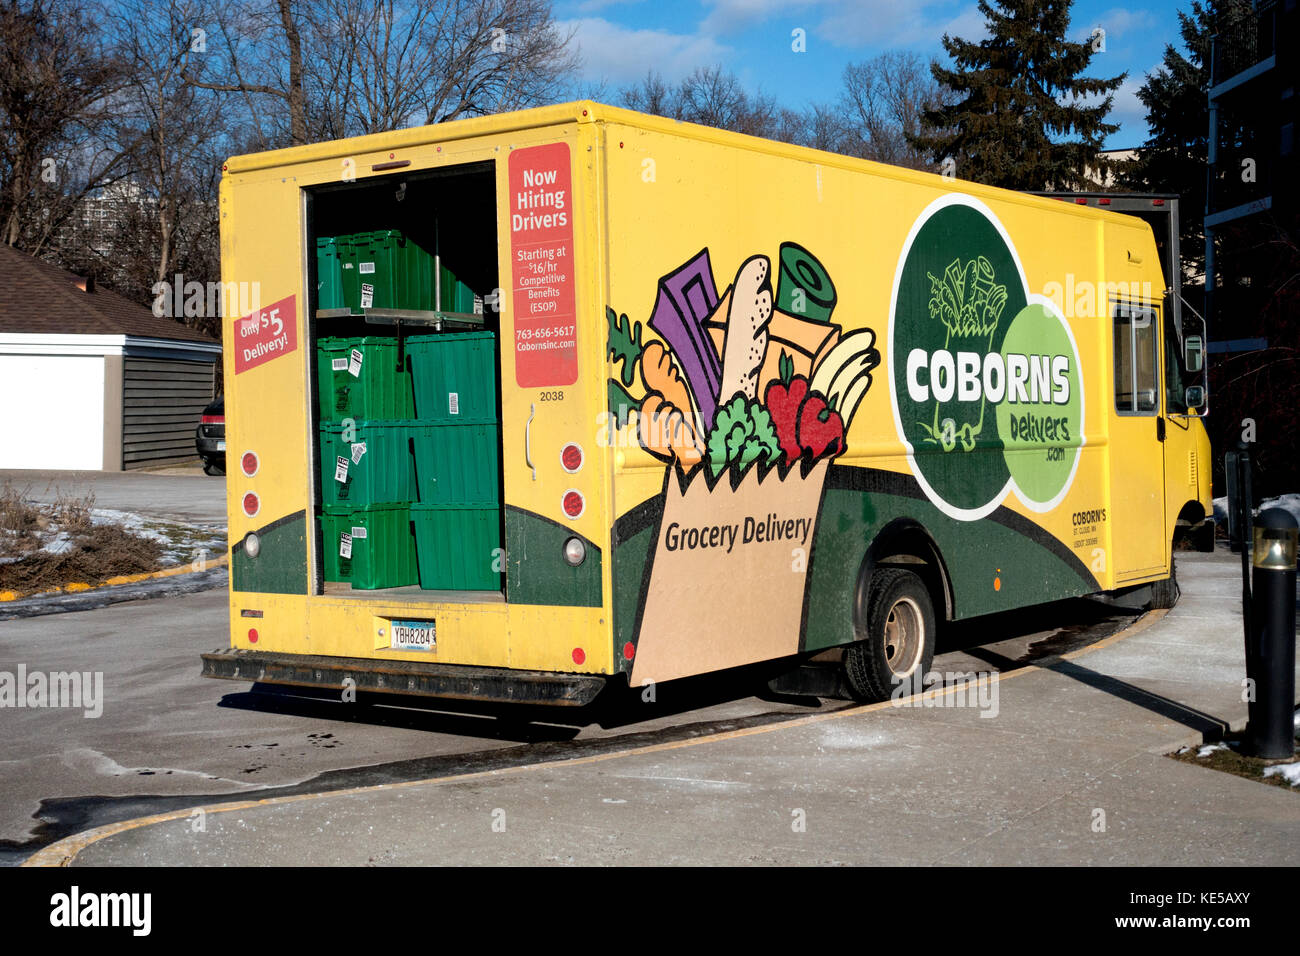 Coborns Delivers.com yellow grocery delivery truck loaded with green baskets filled with fresh groceries being delivered. St Paul Minnesota MN USA Stock Photo